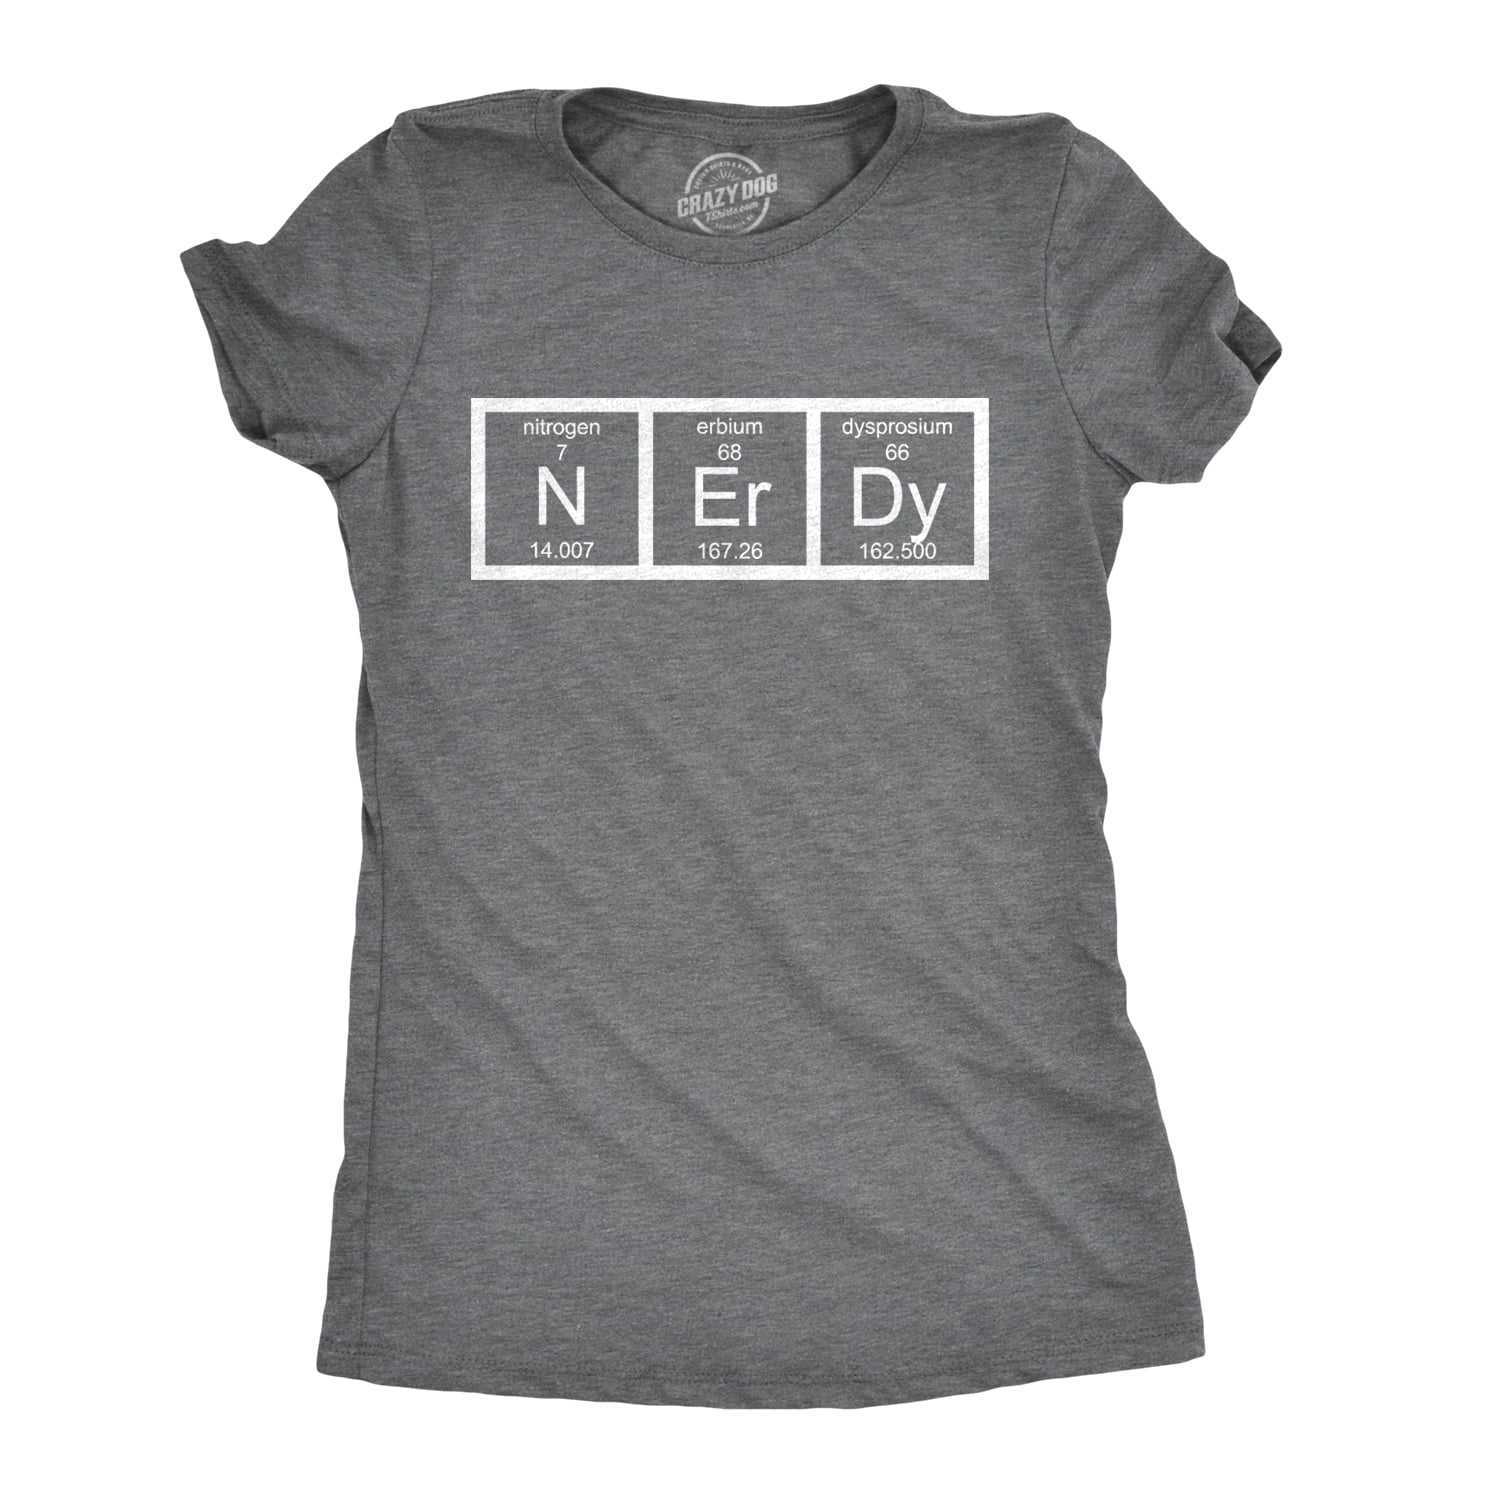 Womens Nerdy Periodic Table T Shirt Funny Science Dork Geek Tee for Ladies (Dark Heather Grey) - 3XL Womens Graphic Tees -